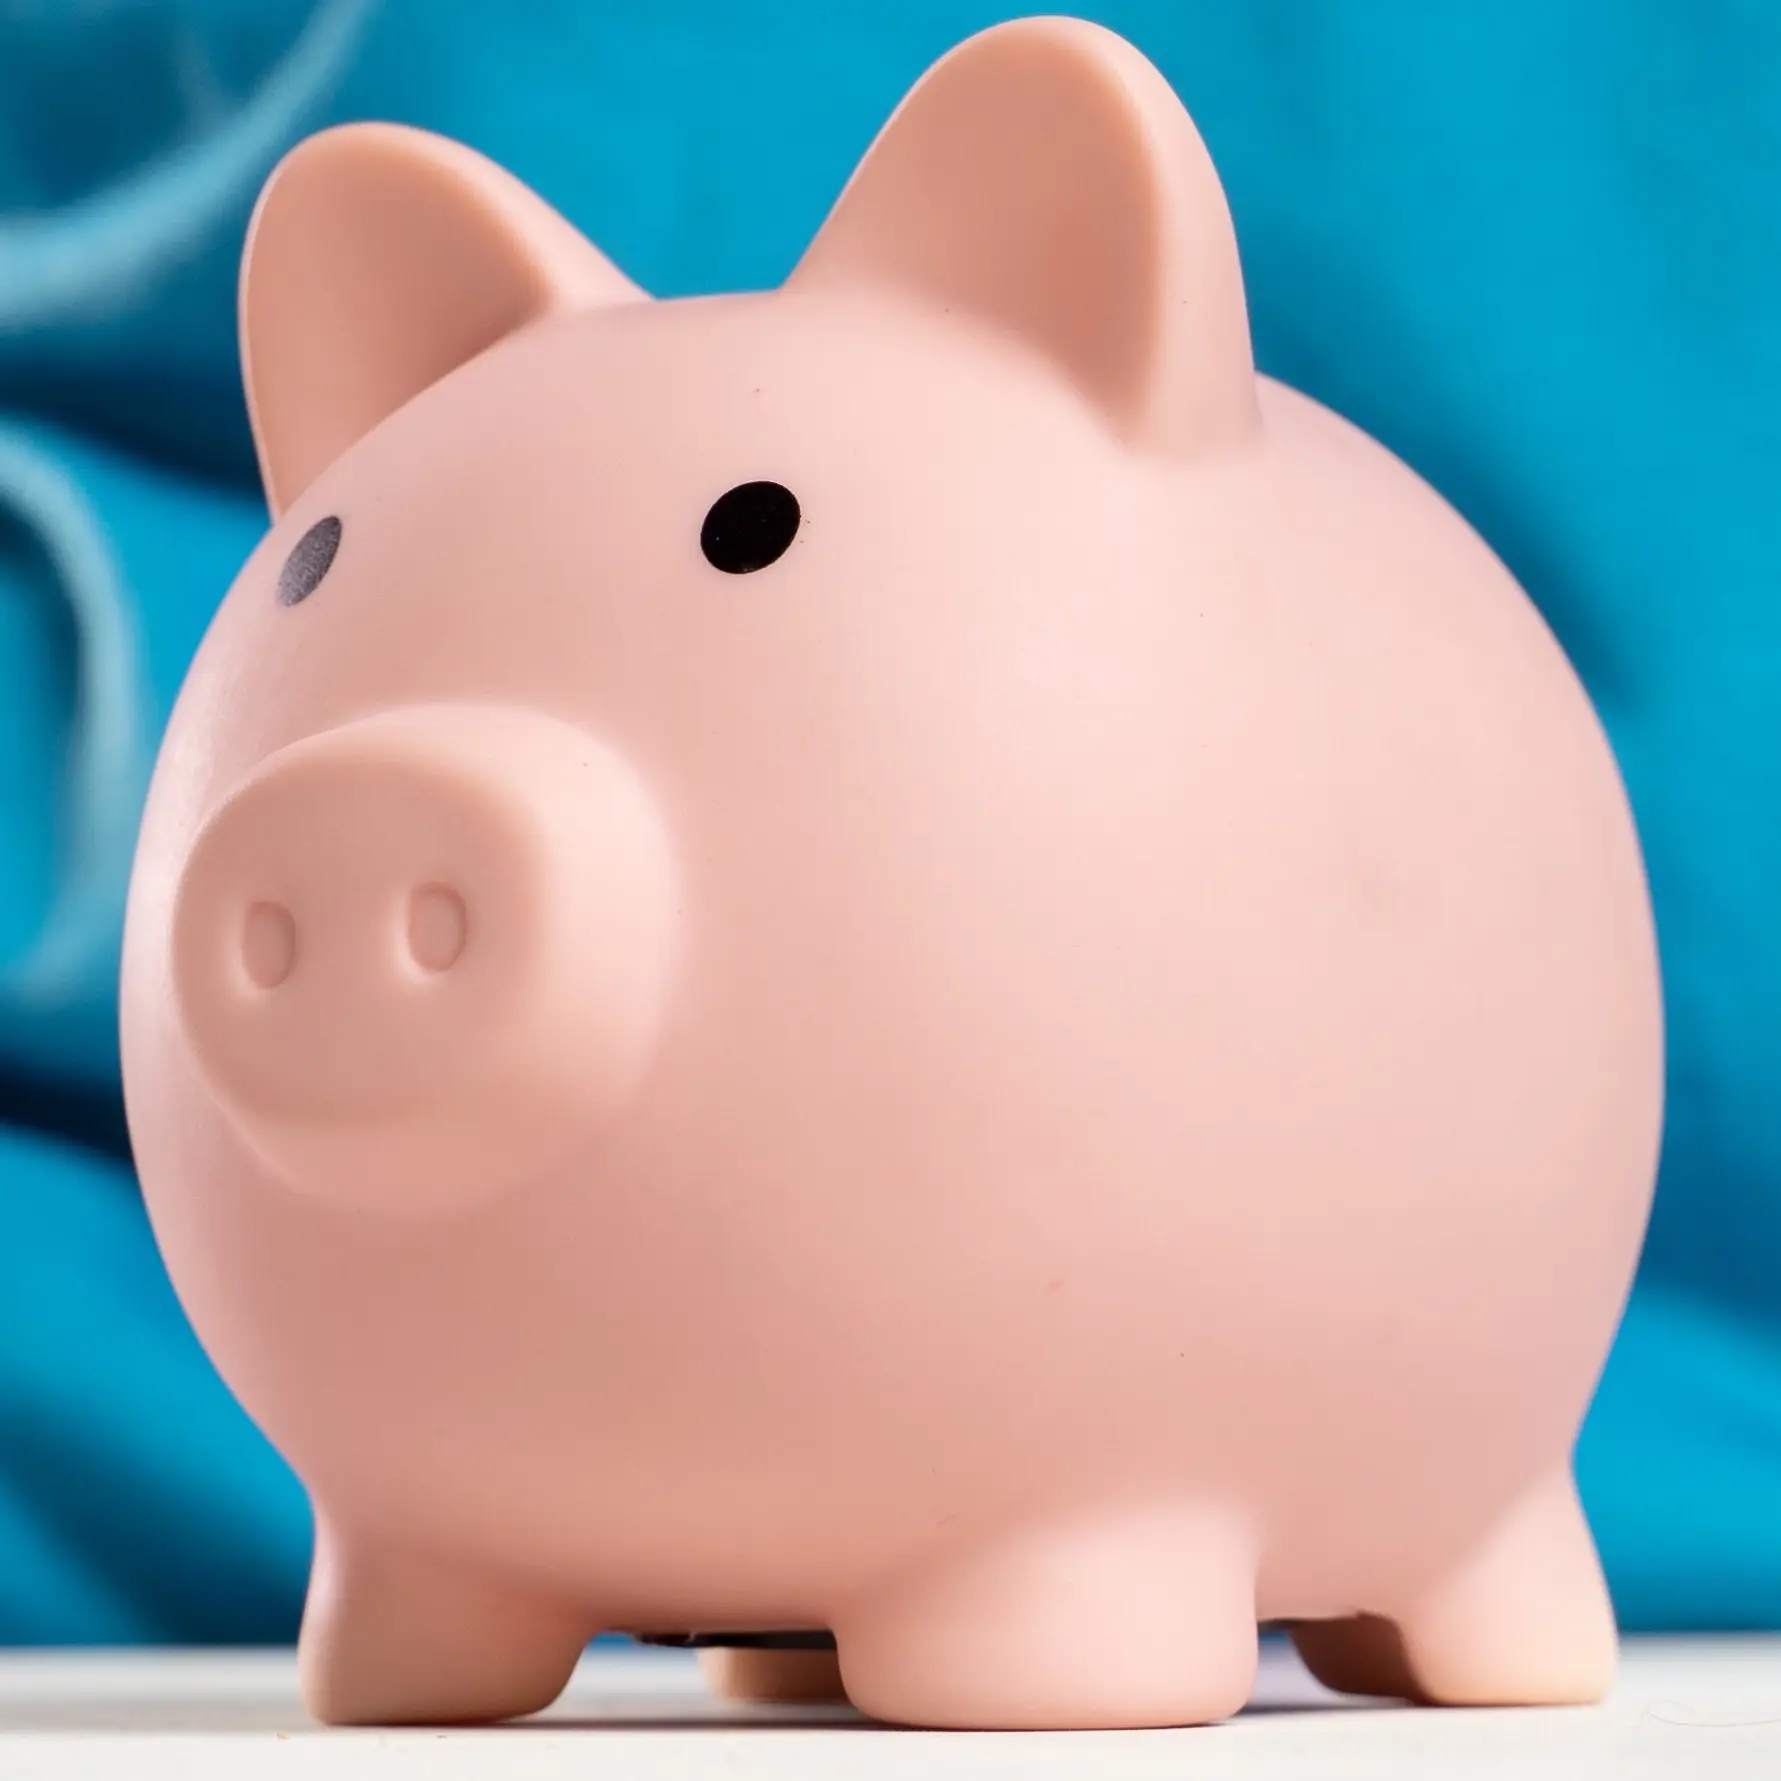 A white piggy bank on a blue background